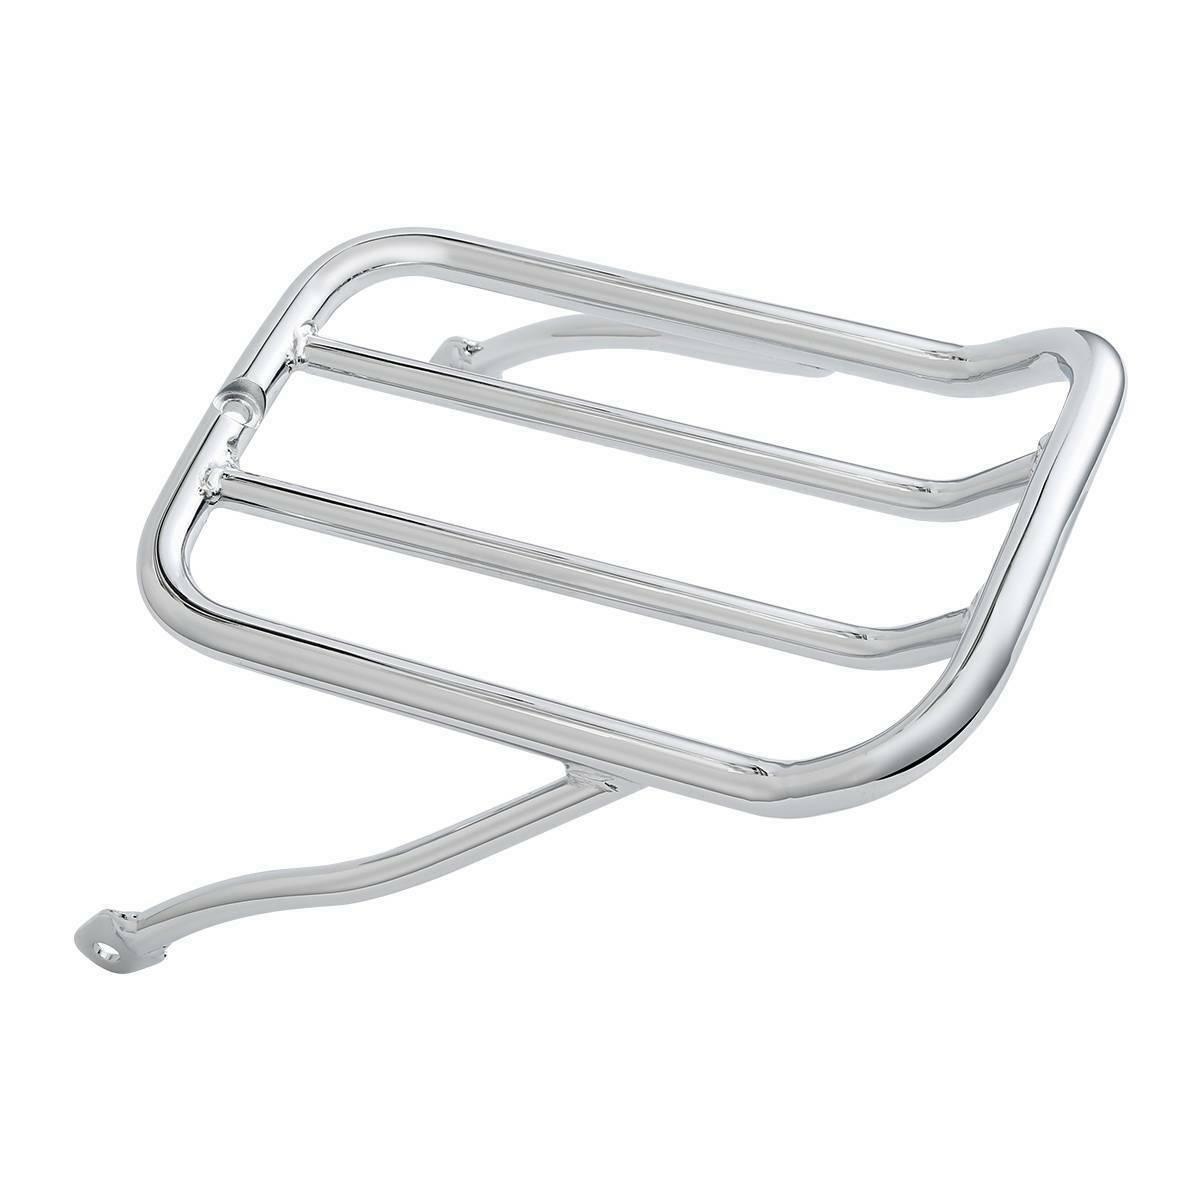 Chrome Rear Fender Luggage Rack Fit For Harley Sportster XL883 XL1200 2009-2022 - Moto Life Products